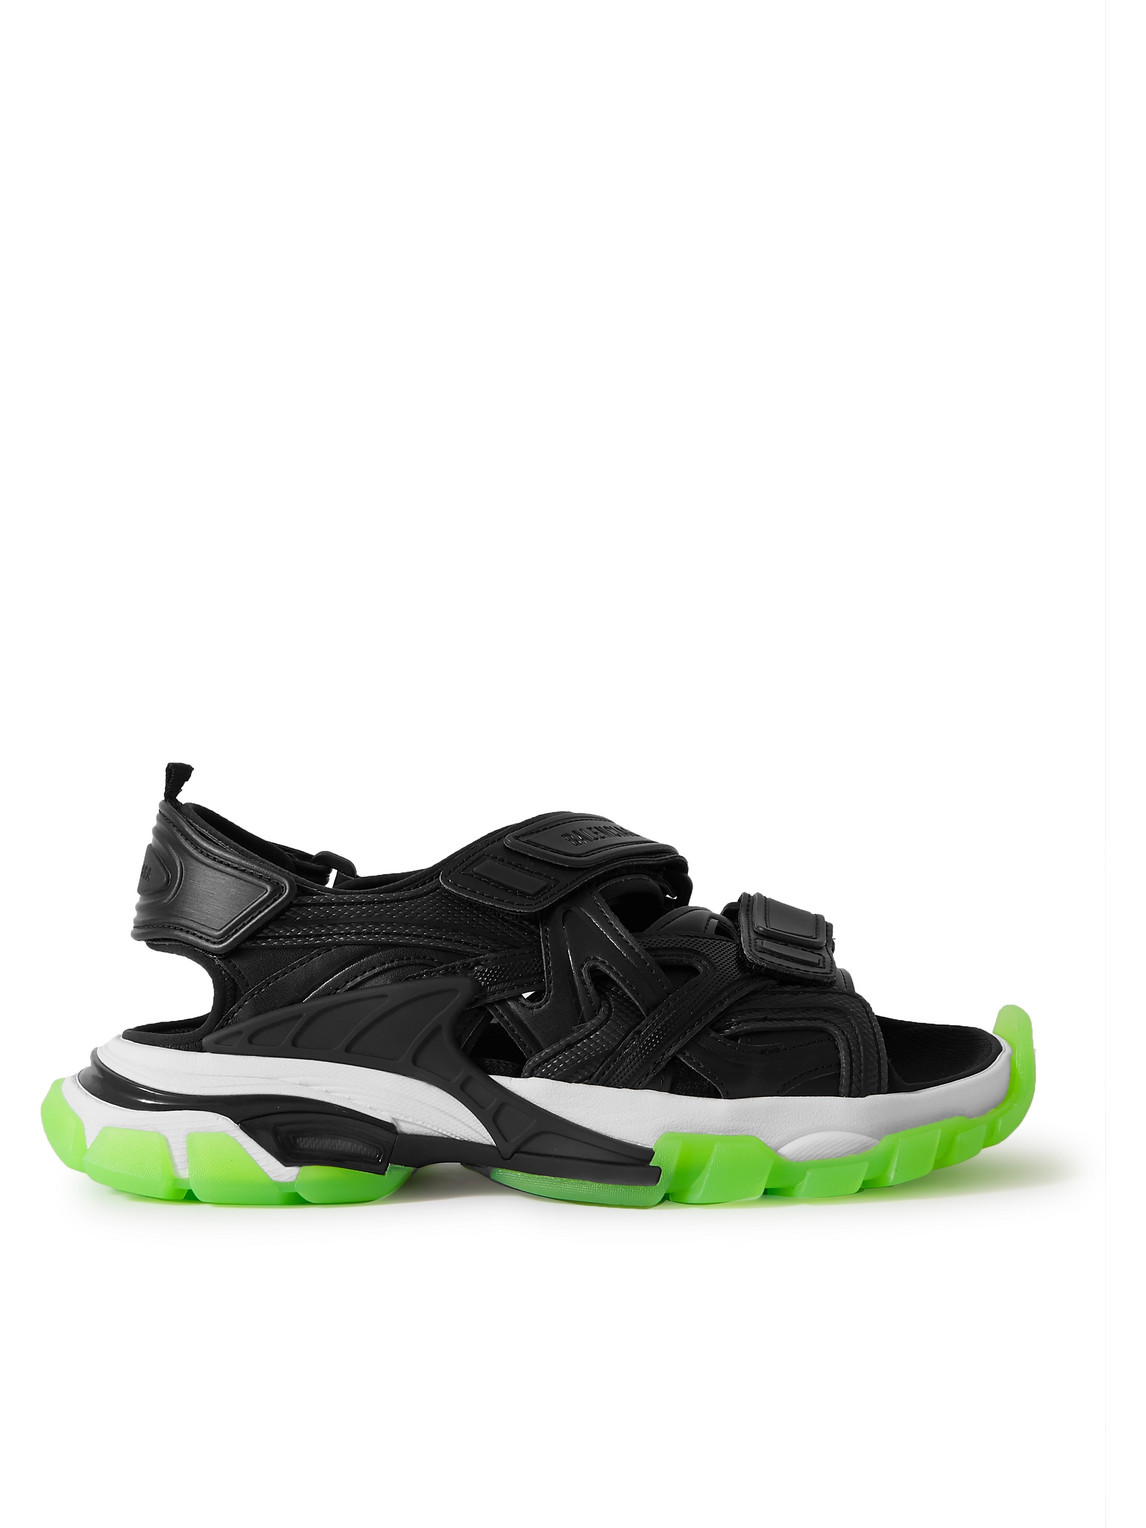 sarkom beskyttelse Omkostningsprocent Balenciaga Neoprene And Rubber Clearsole Track Sandals, Brand Size 41 (us  Size 8) In Noir/green | ModeSens